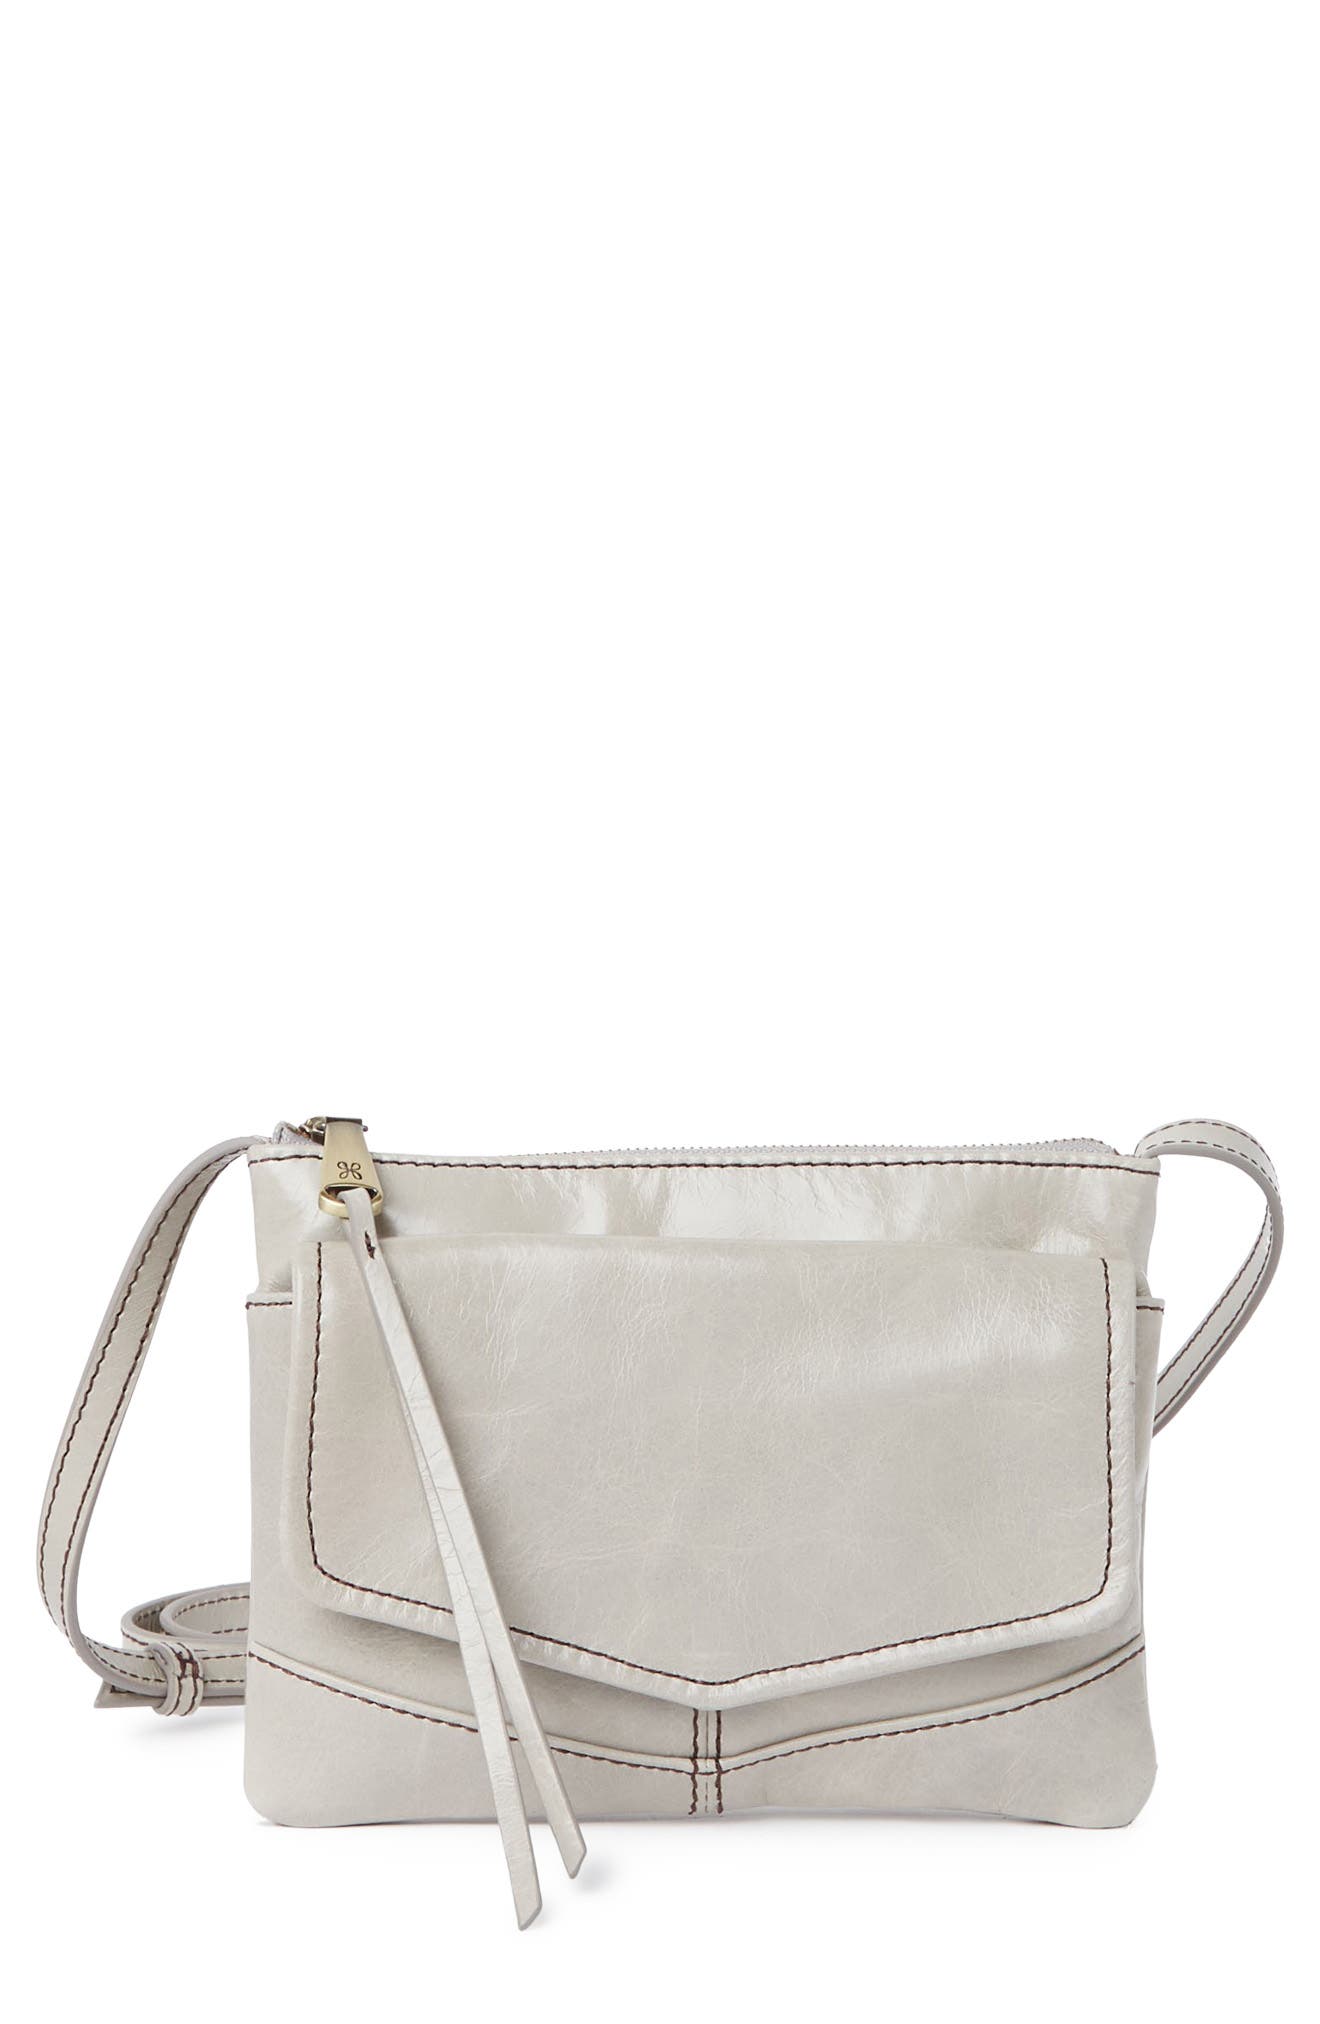 Hobo Amble Leather Crossbody Bag In Dovetail